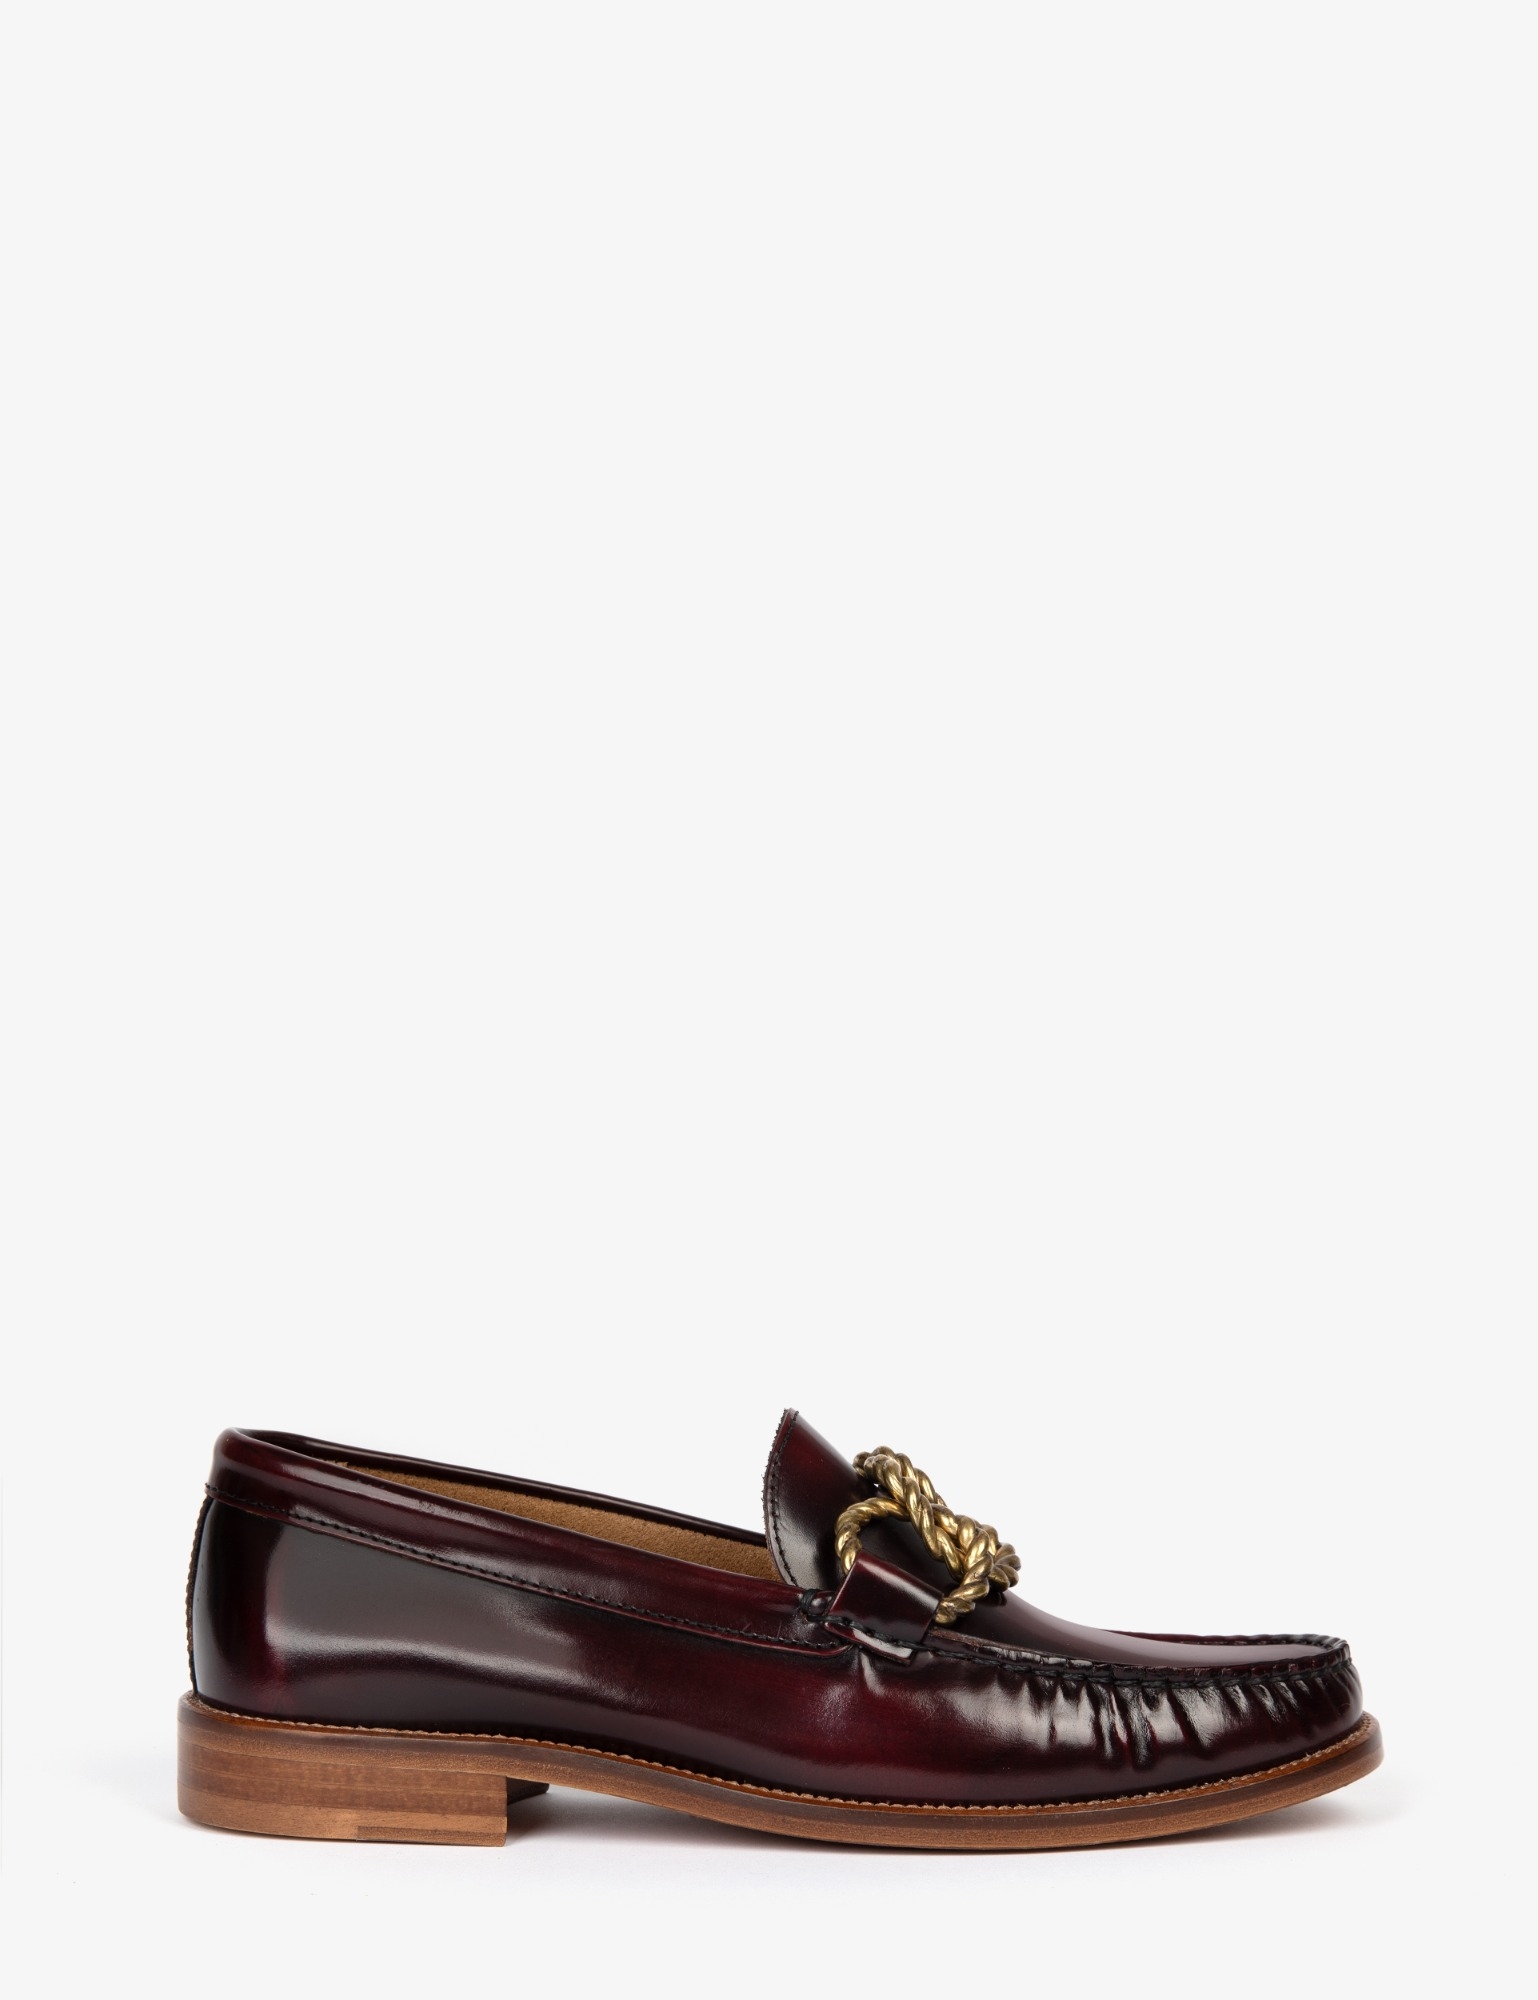 Braided Barley Florentic Loafer -Bordeaux | Women Shoes |Penelope Chilvers